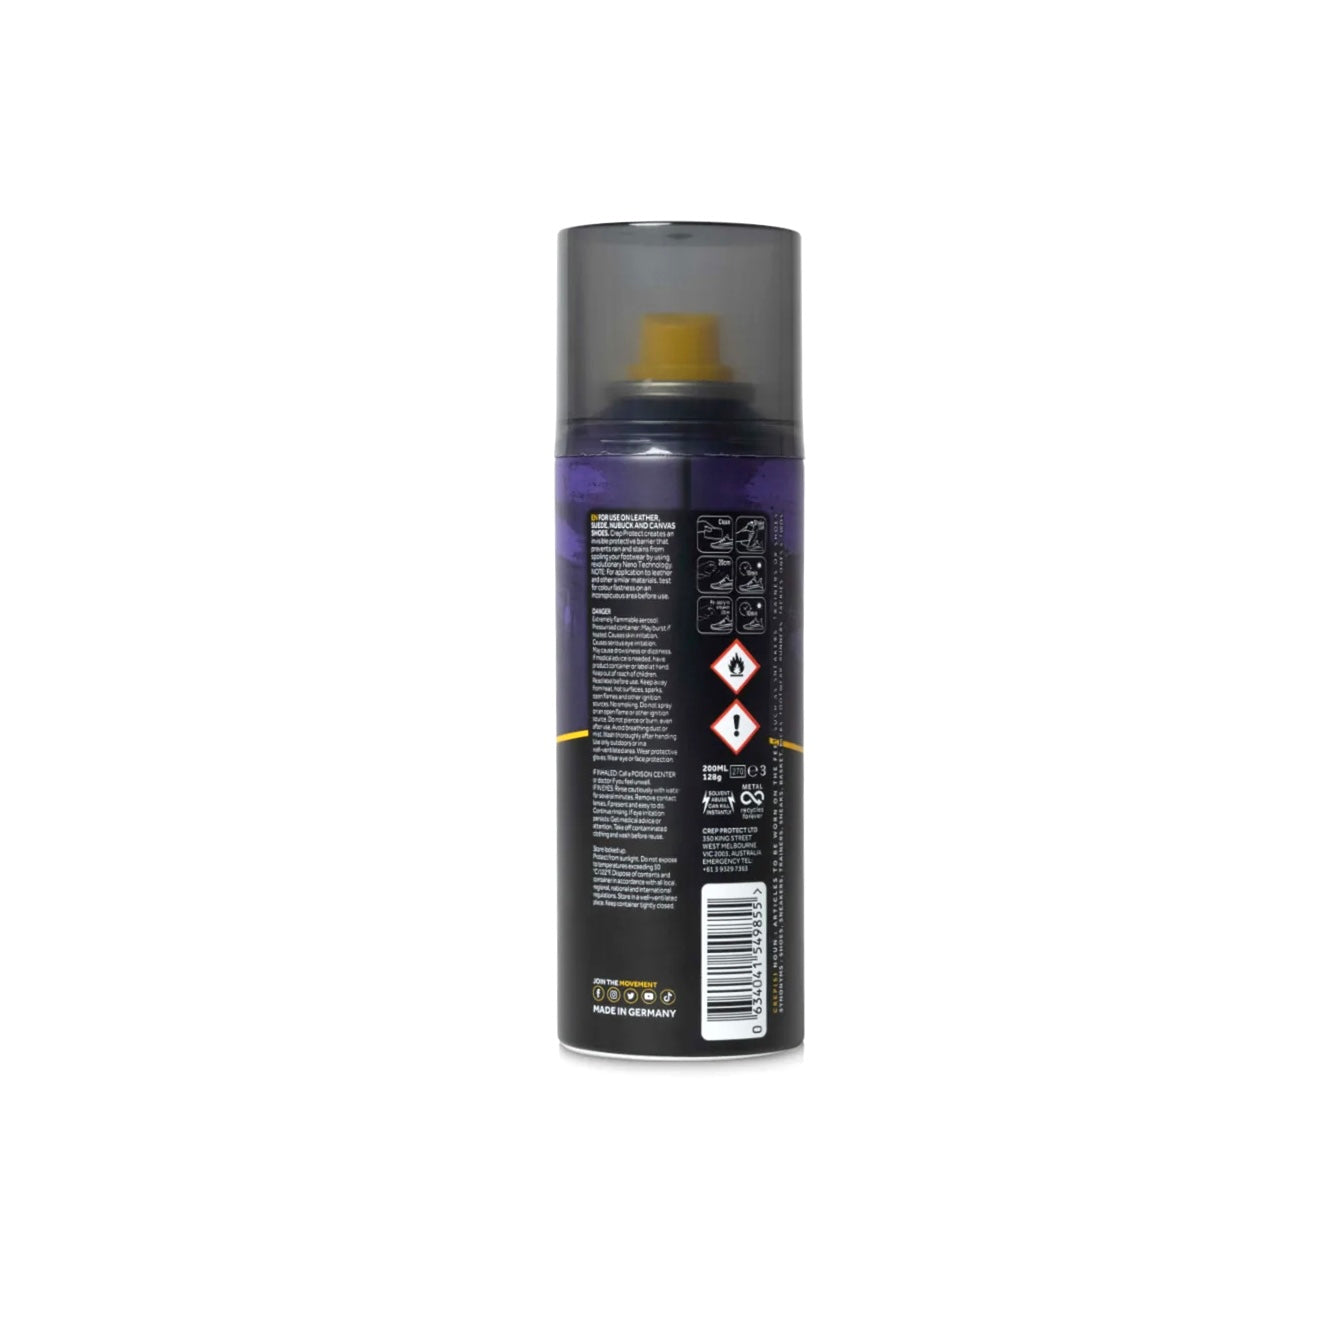 Crep Protect Rain & Stain Barrier